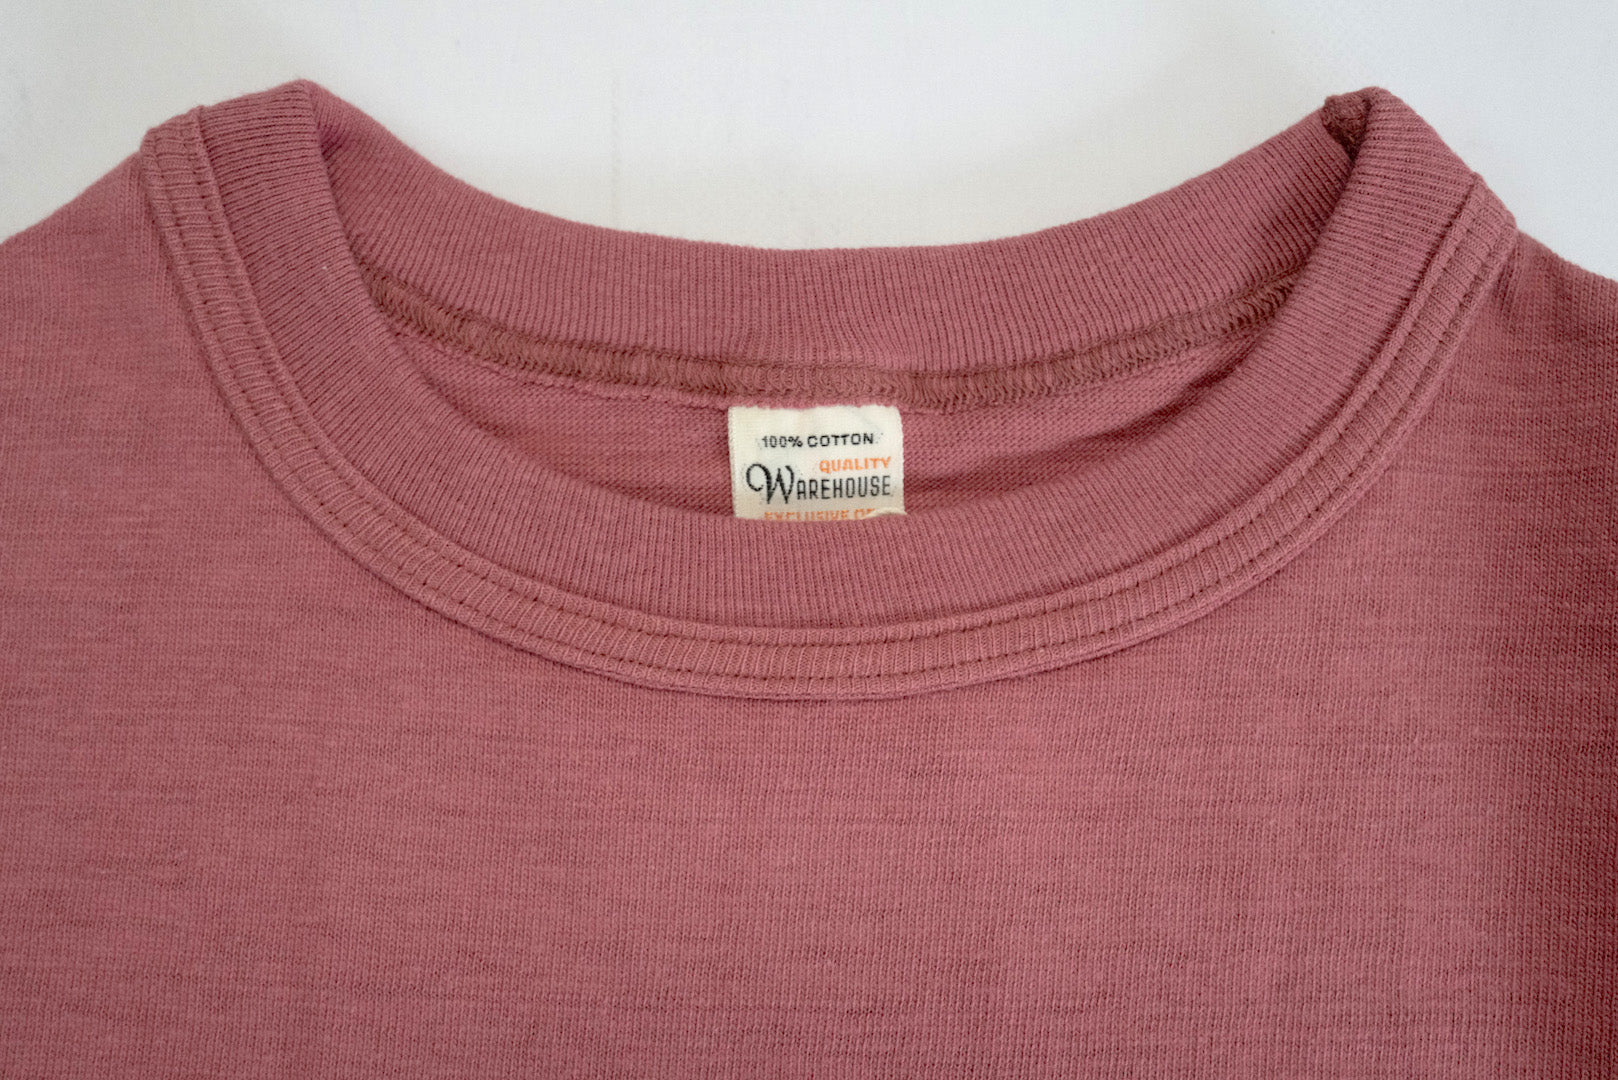 Warehouse 5.5oz "Bamboo Textured" Pocket Tee (Faded Red)